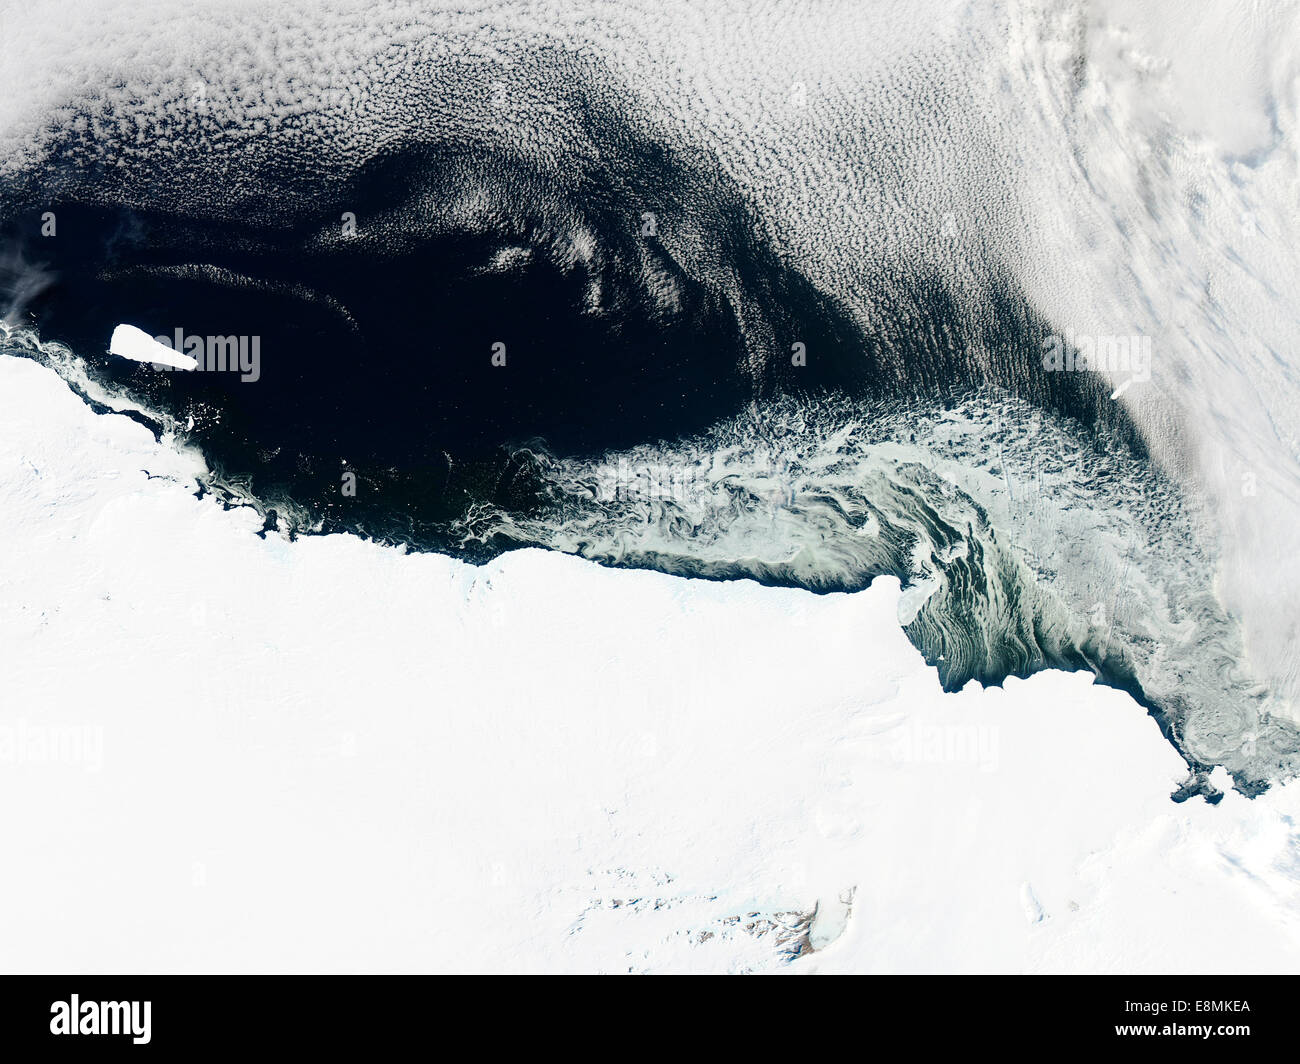 March 15, 2013 - Sea ice and icebergs floating along the Mawson Coast of East Antarctica. Stock Photo